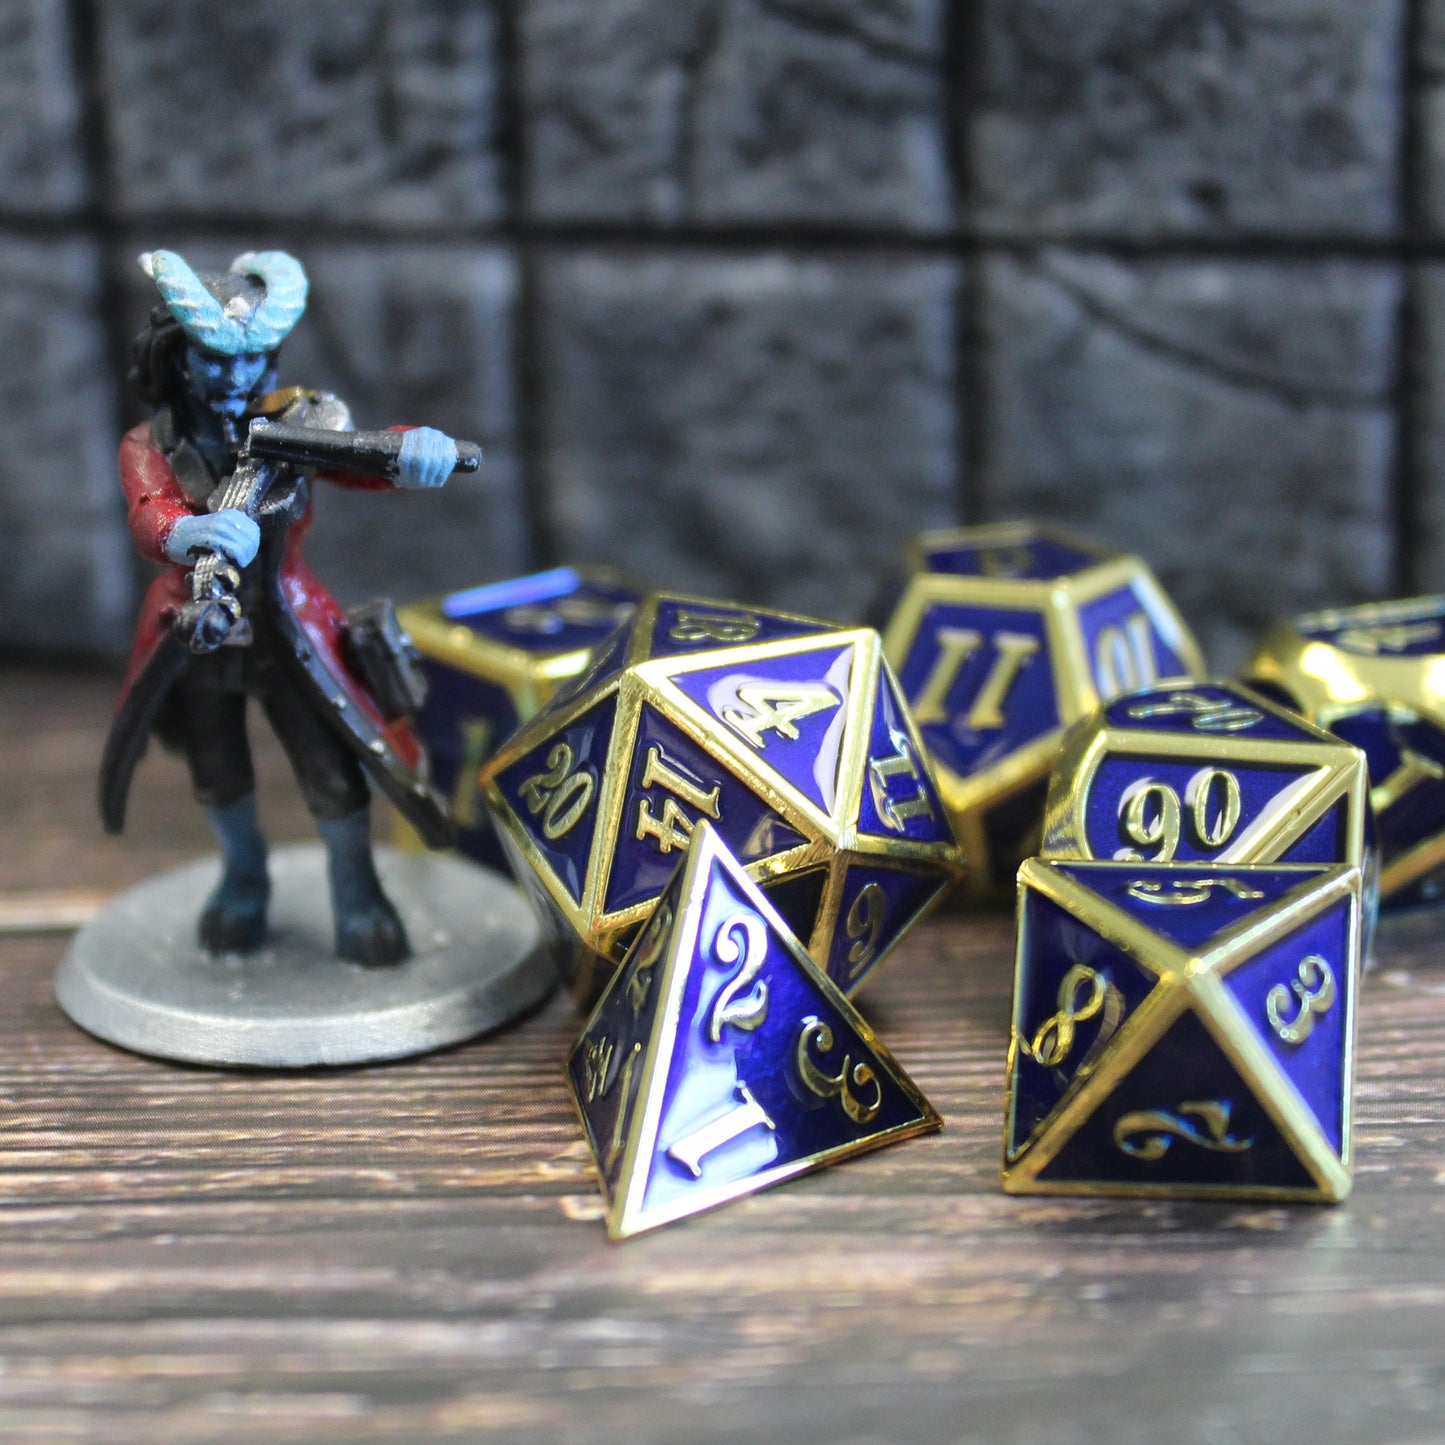 blue and gold metal dice beside mini for scale